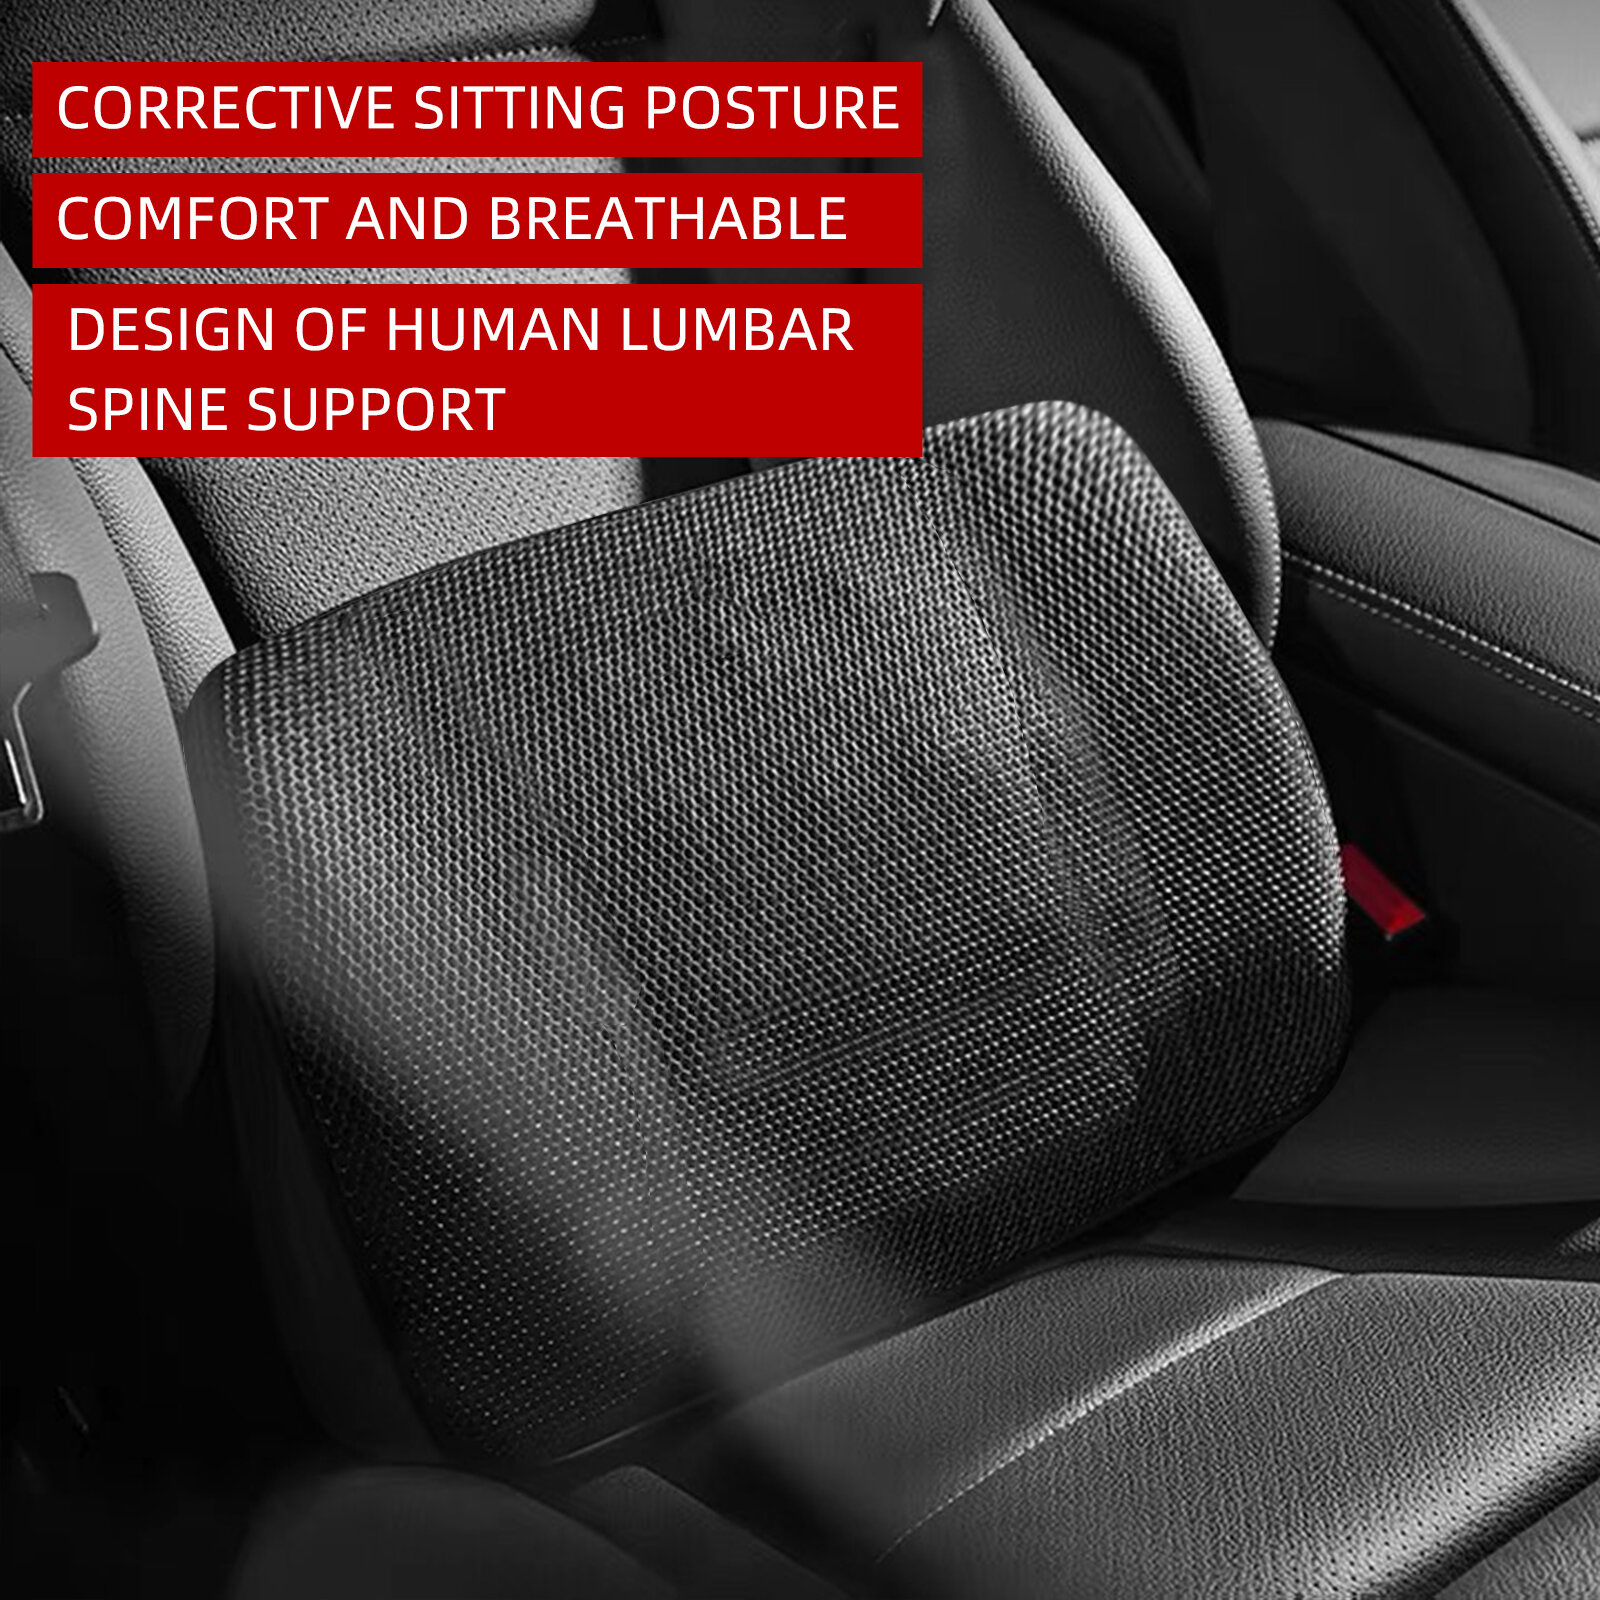 Memory Foam Ergonomic Back Cushion Back Support for Car Lumbar/Back Pain Relief Supportive and Comfortable Removeable Cover Car Back Support Lumbar Support for Car Seat Driver Black 